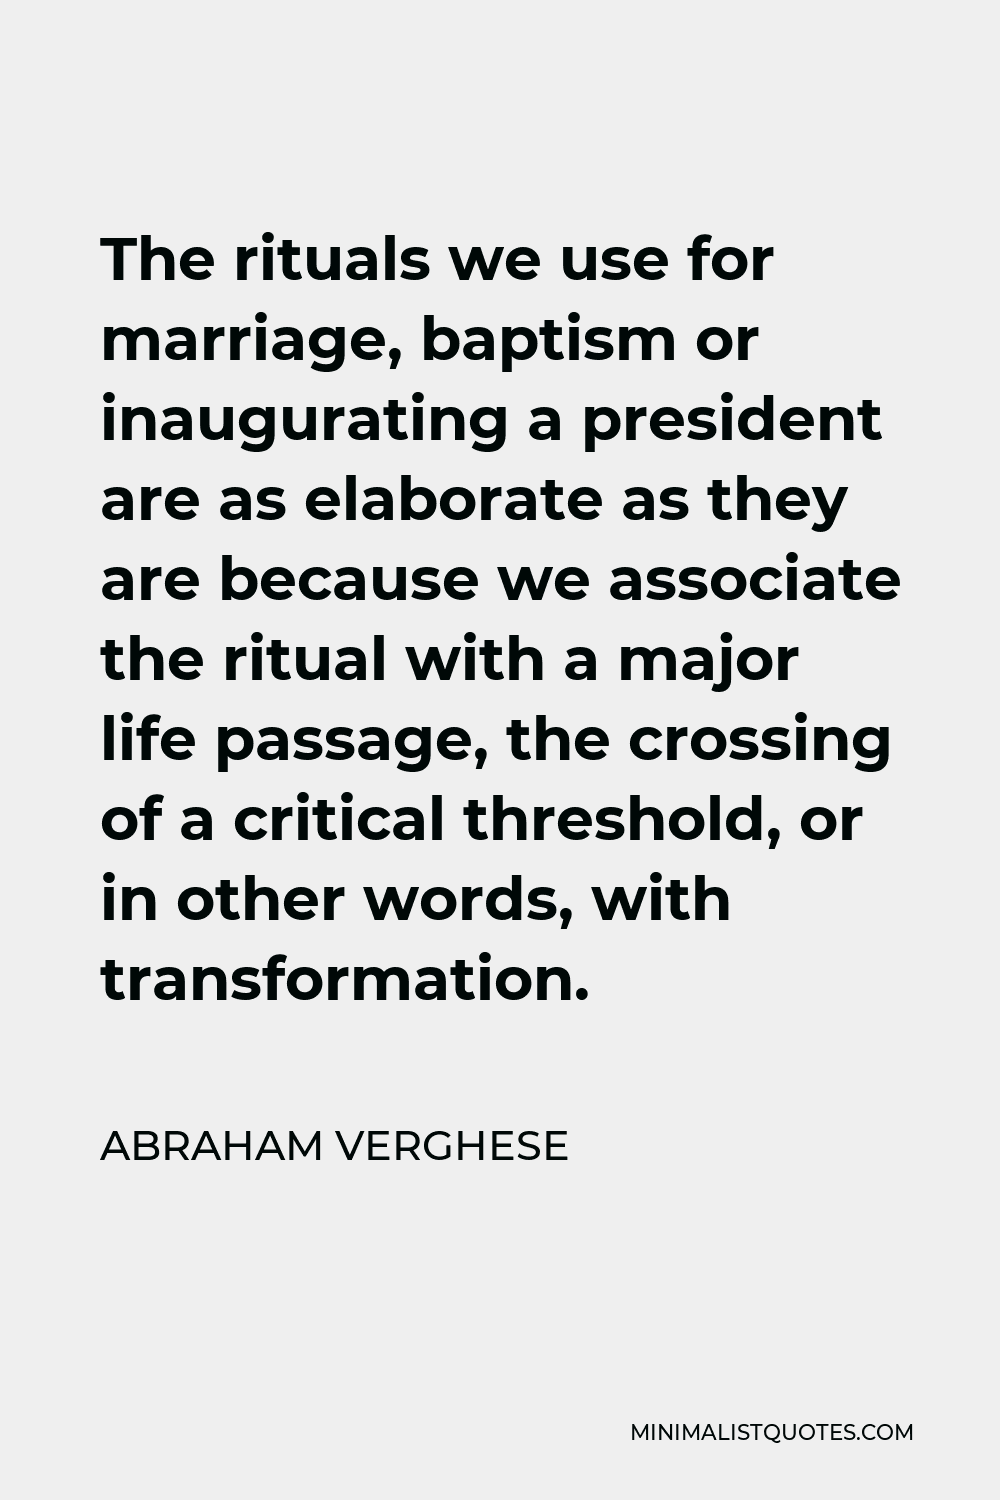 Abraham Verghese Quote - The rituals we use for marriage, baptism or inaugurating a president are as elaborate as they are because we associate the ritual with a major life passage, the crossing of a critical threshold, or in other words, with transformation.